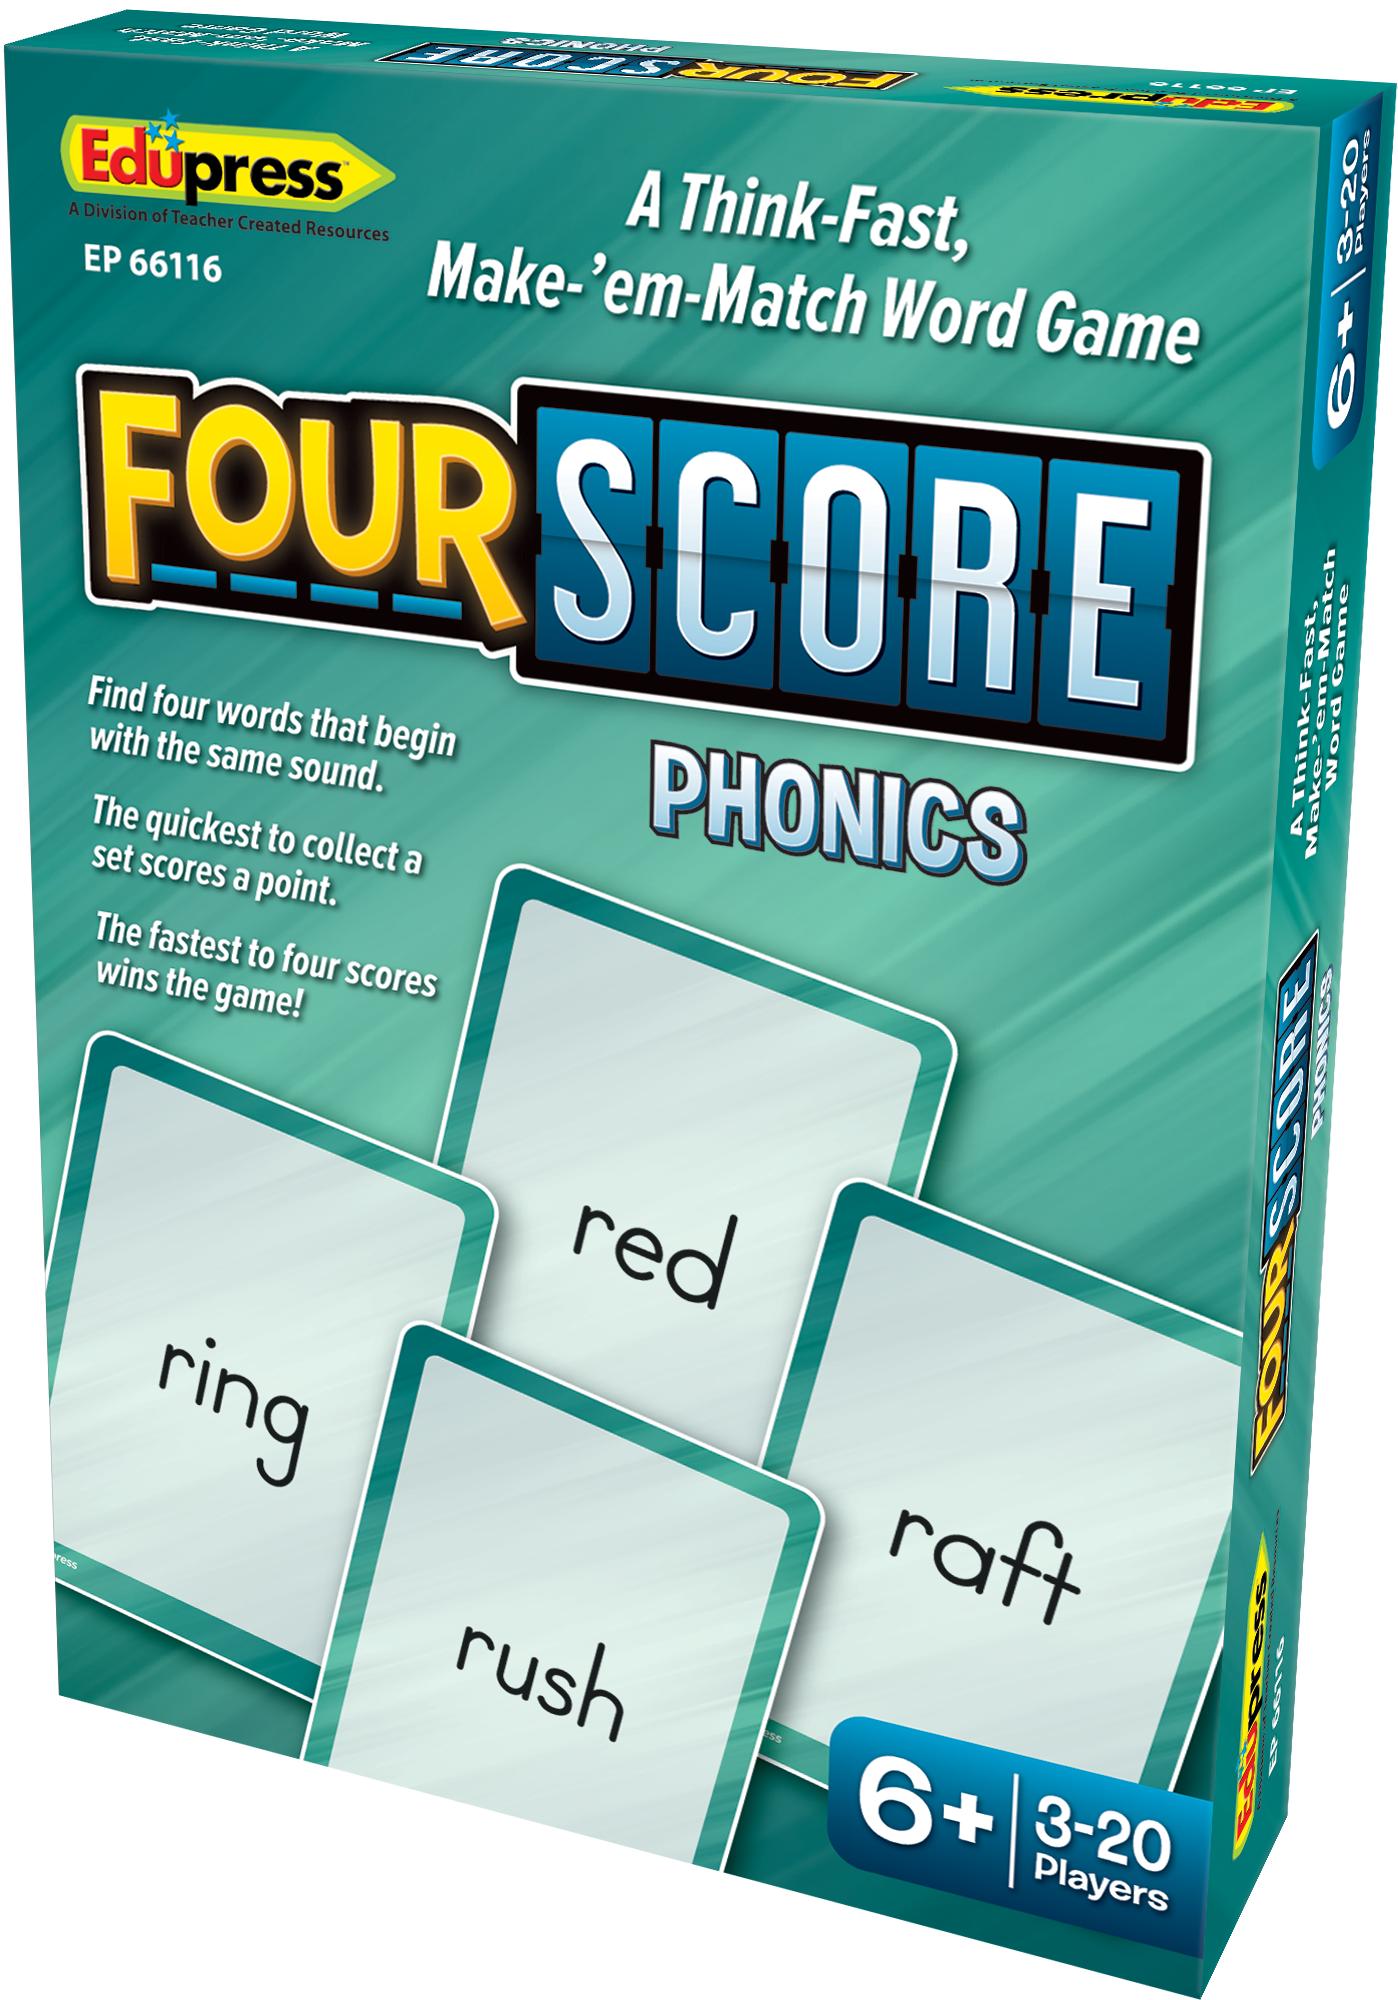 Players will master pronunciation with the Four Score Phonics edition.